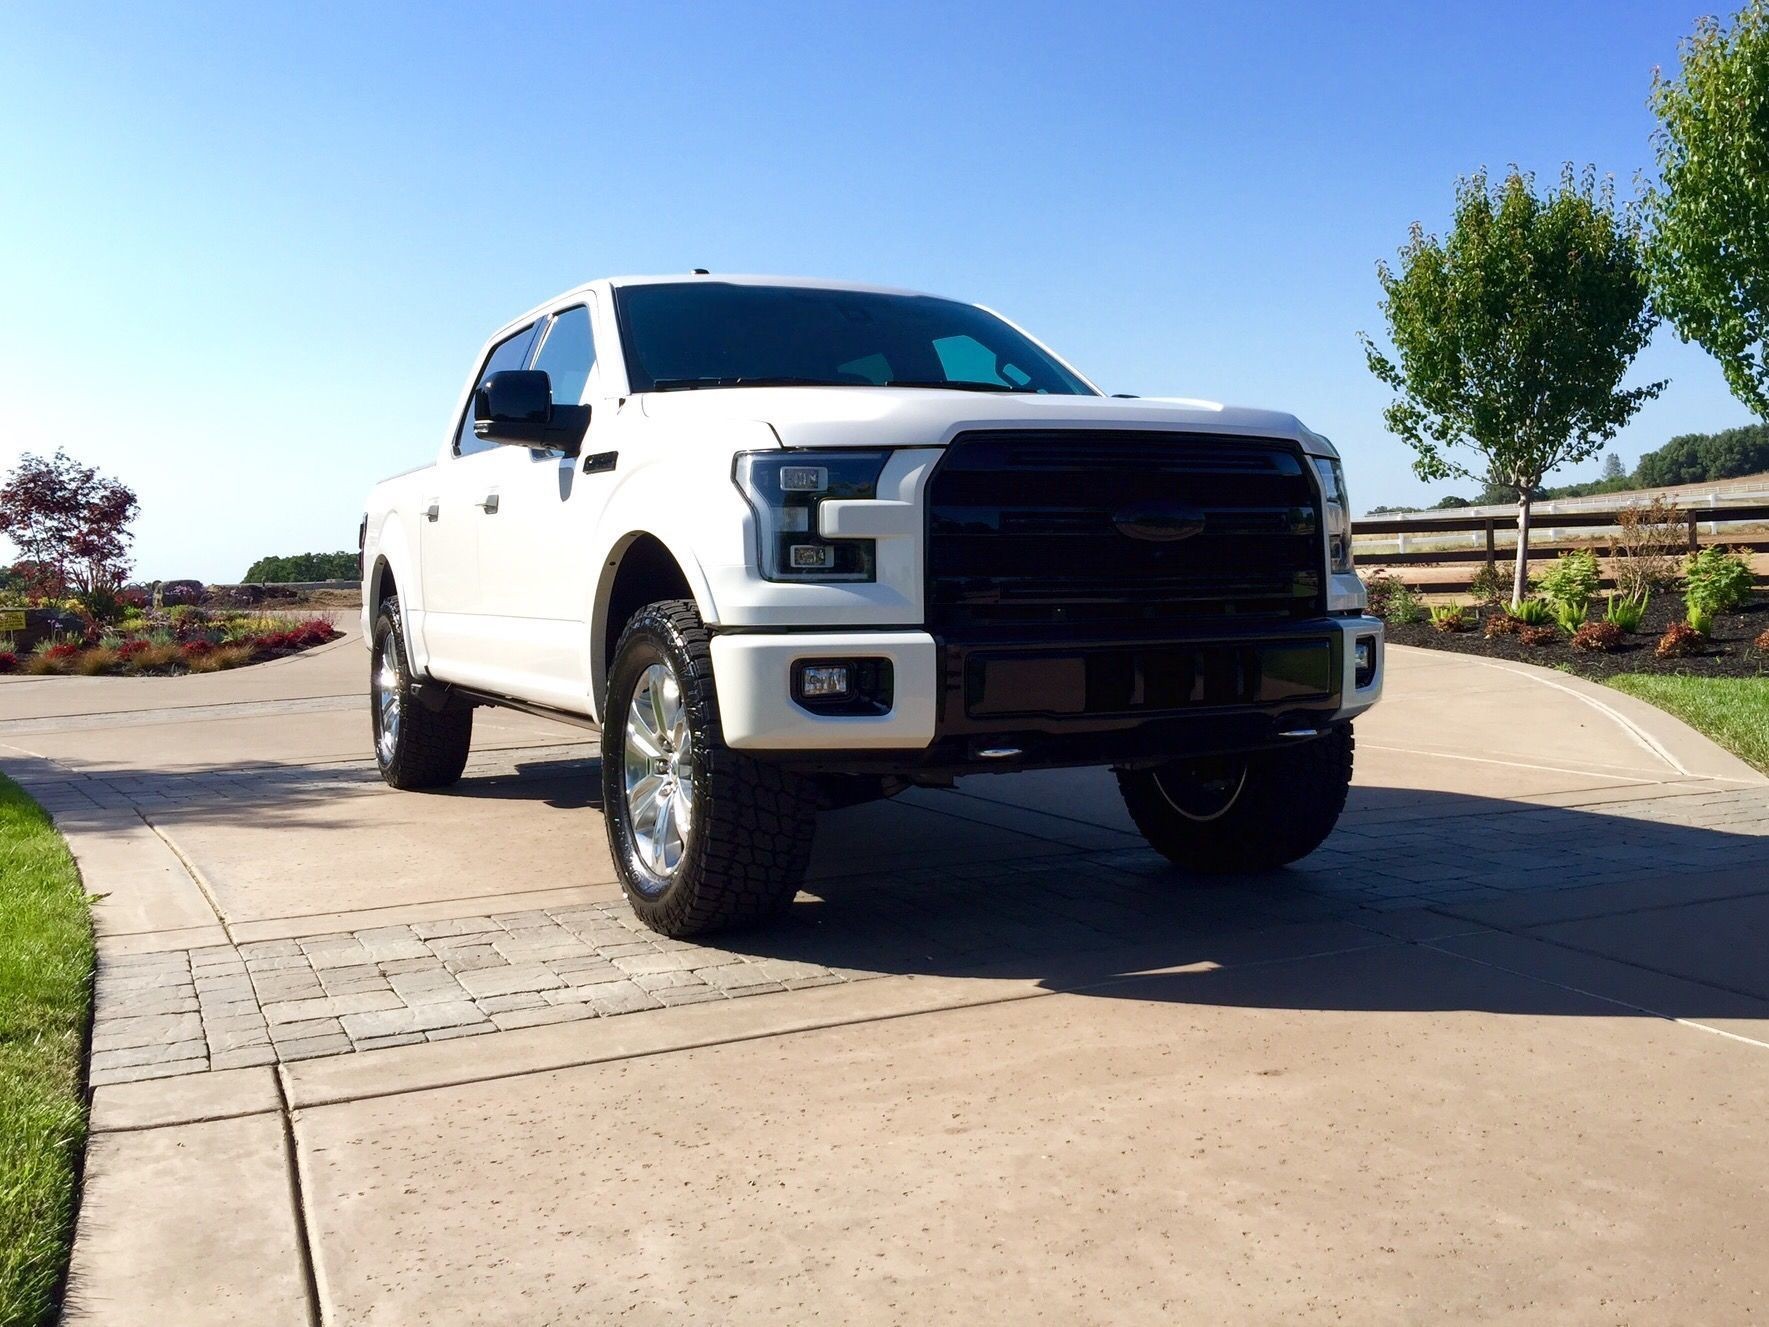 Show me your Leveled trucks with OEM rims Page 3 Ford F150 Forum munity of Ford Truck Fans